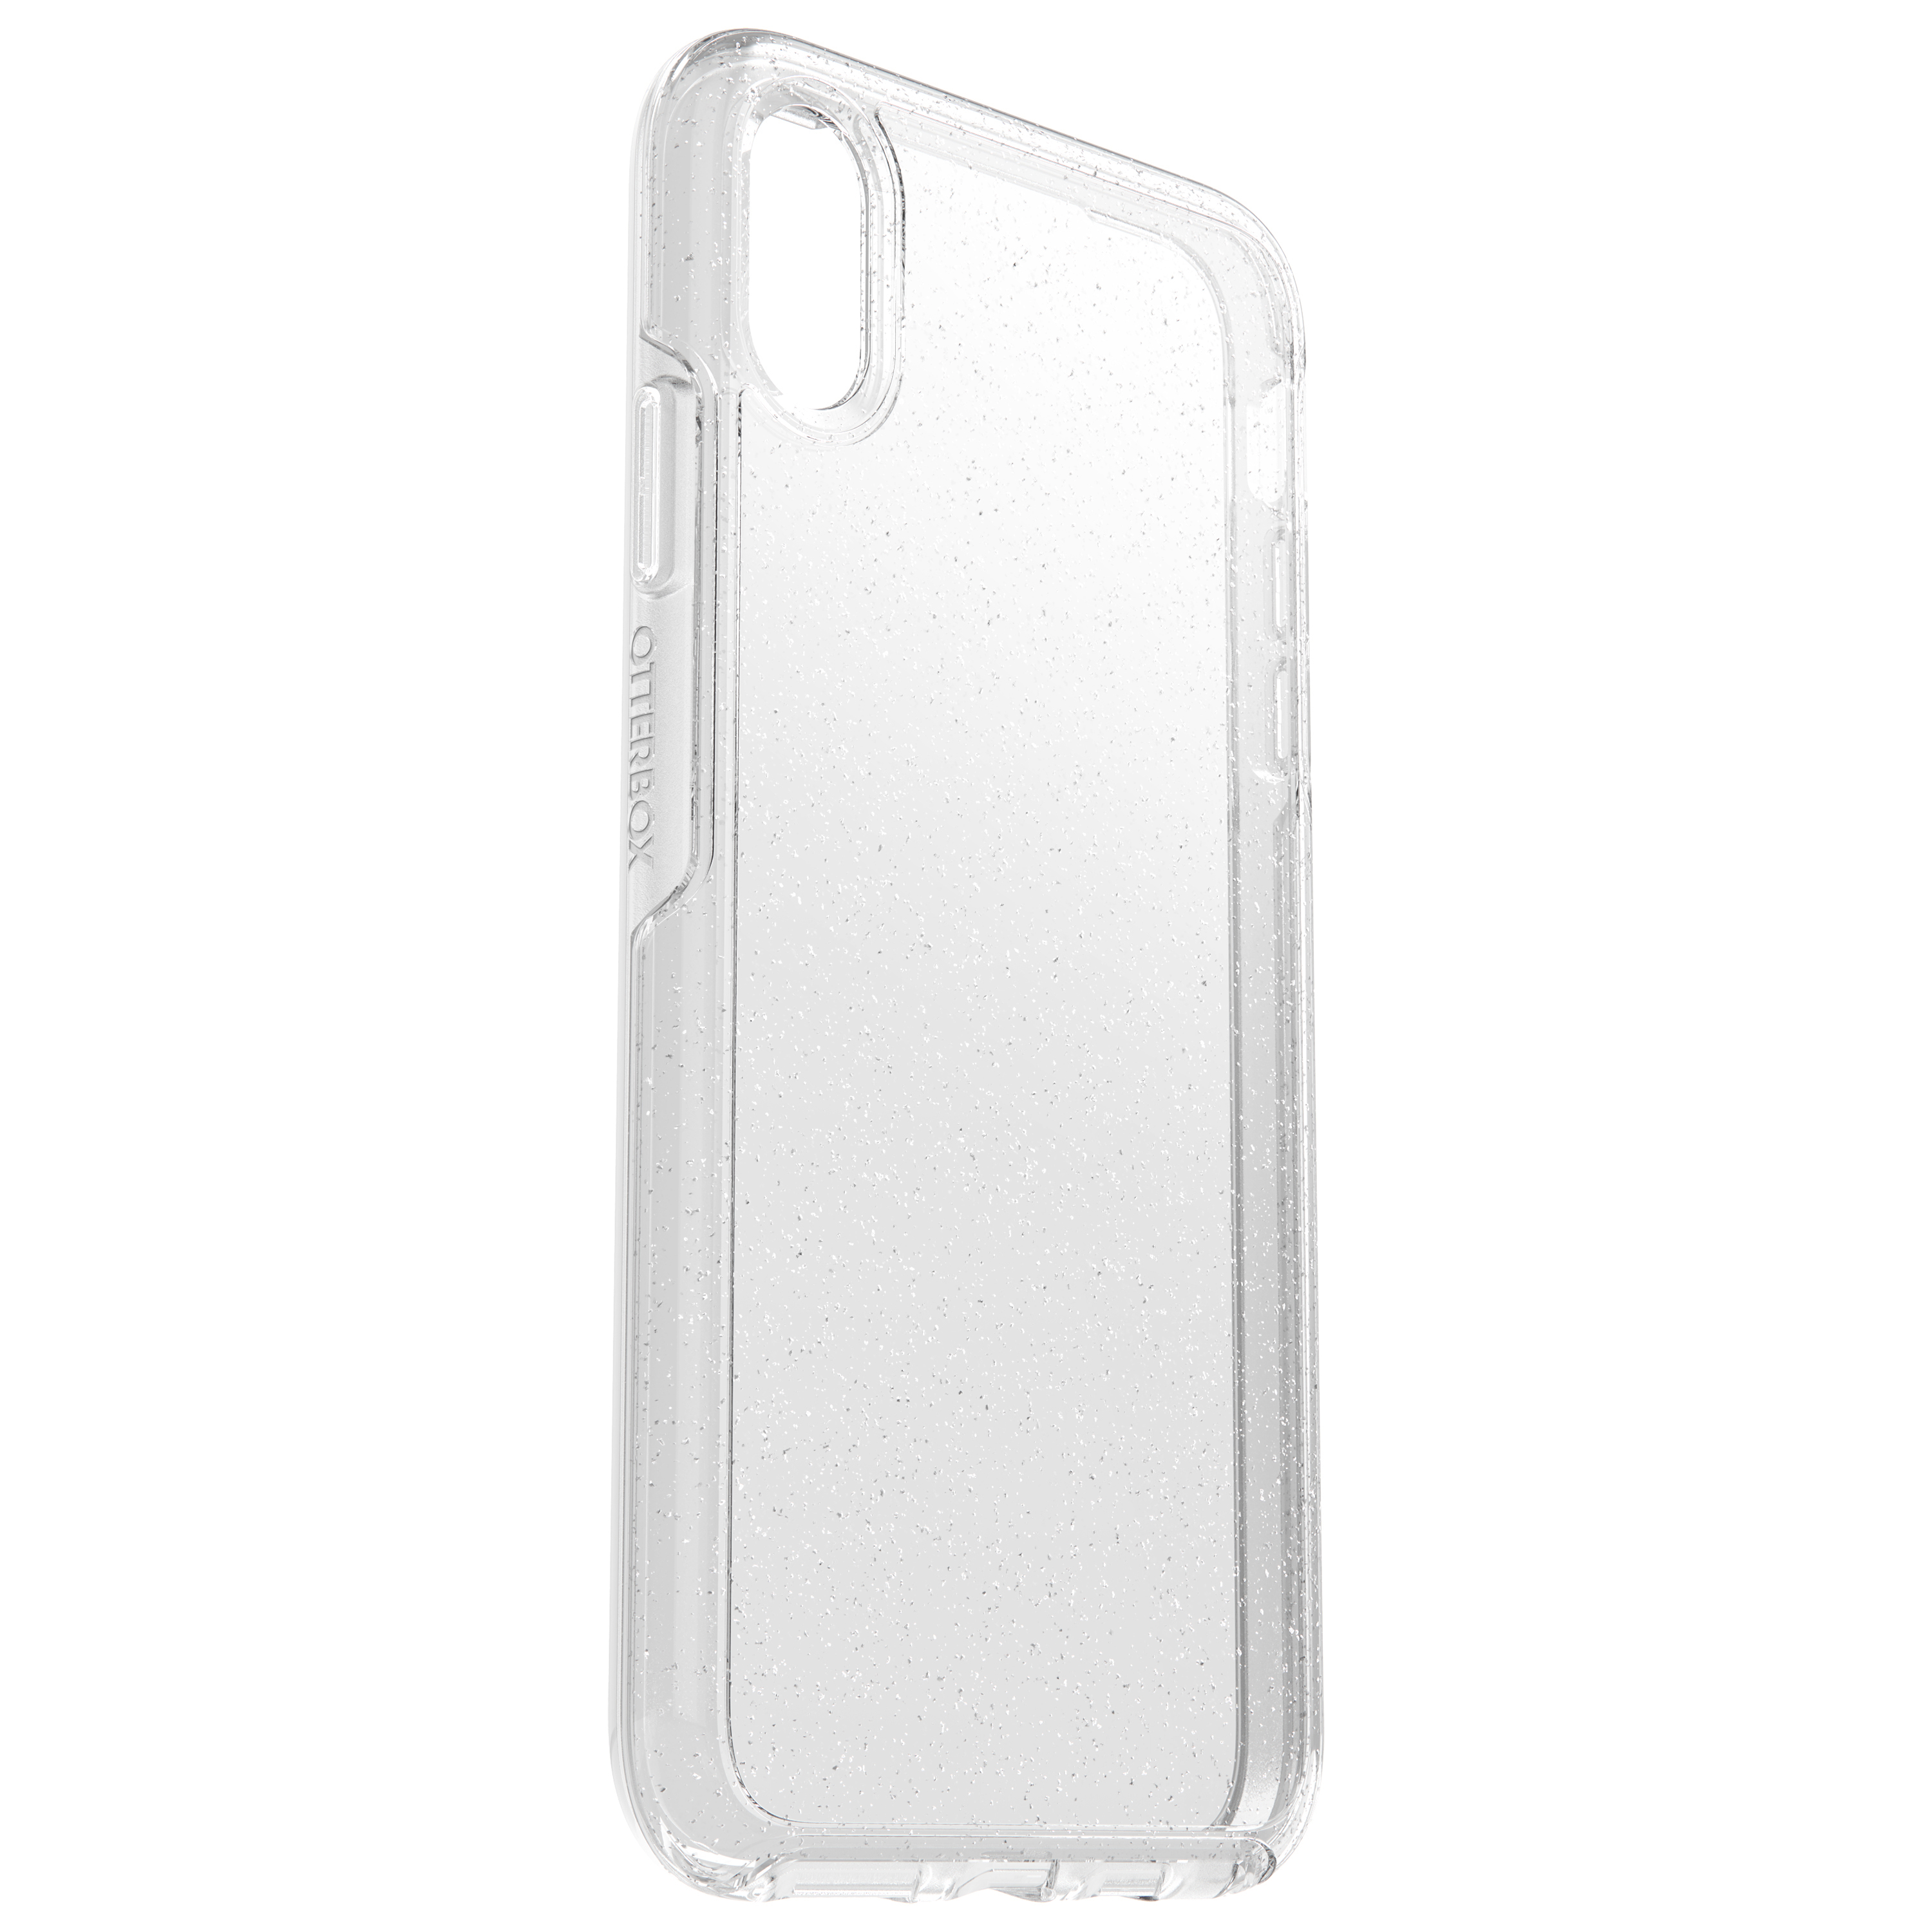 XS Transparent Apple, iPhone Symmetry, Max, Backcover, OTTERBOX